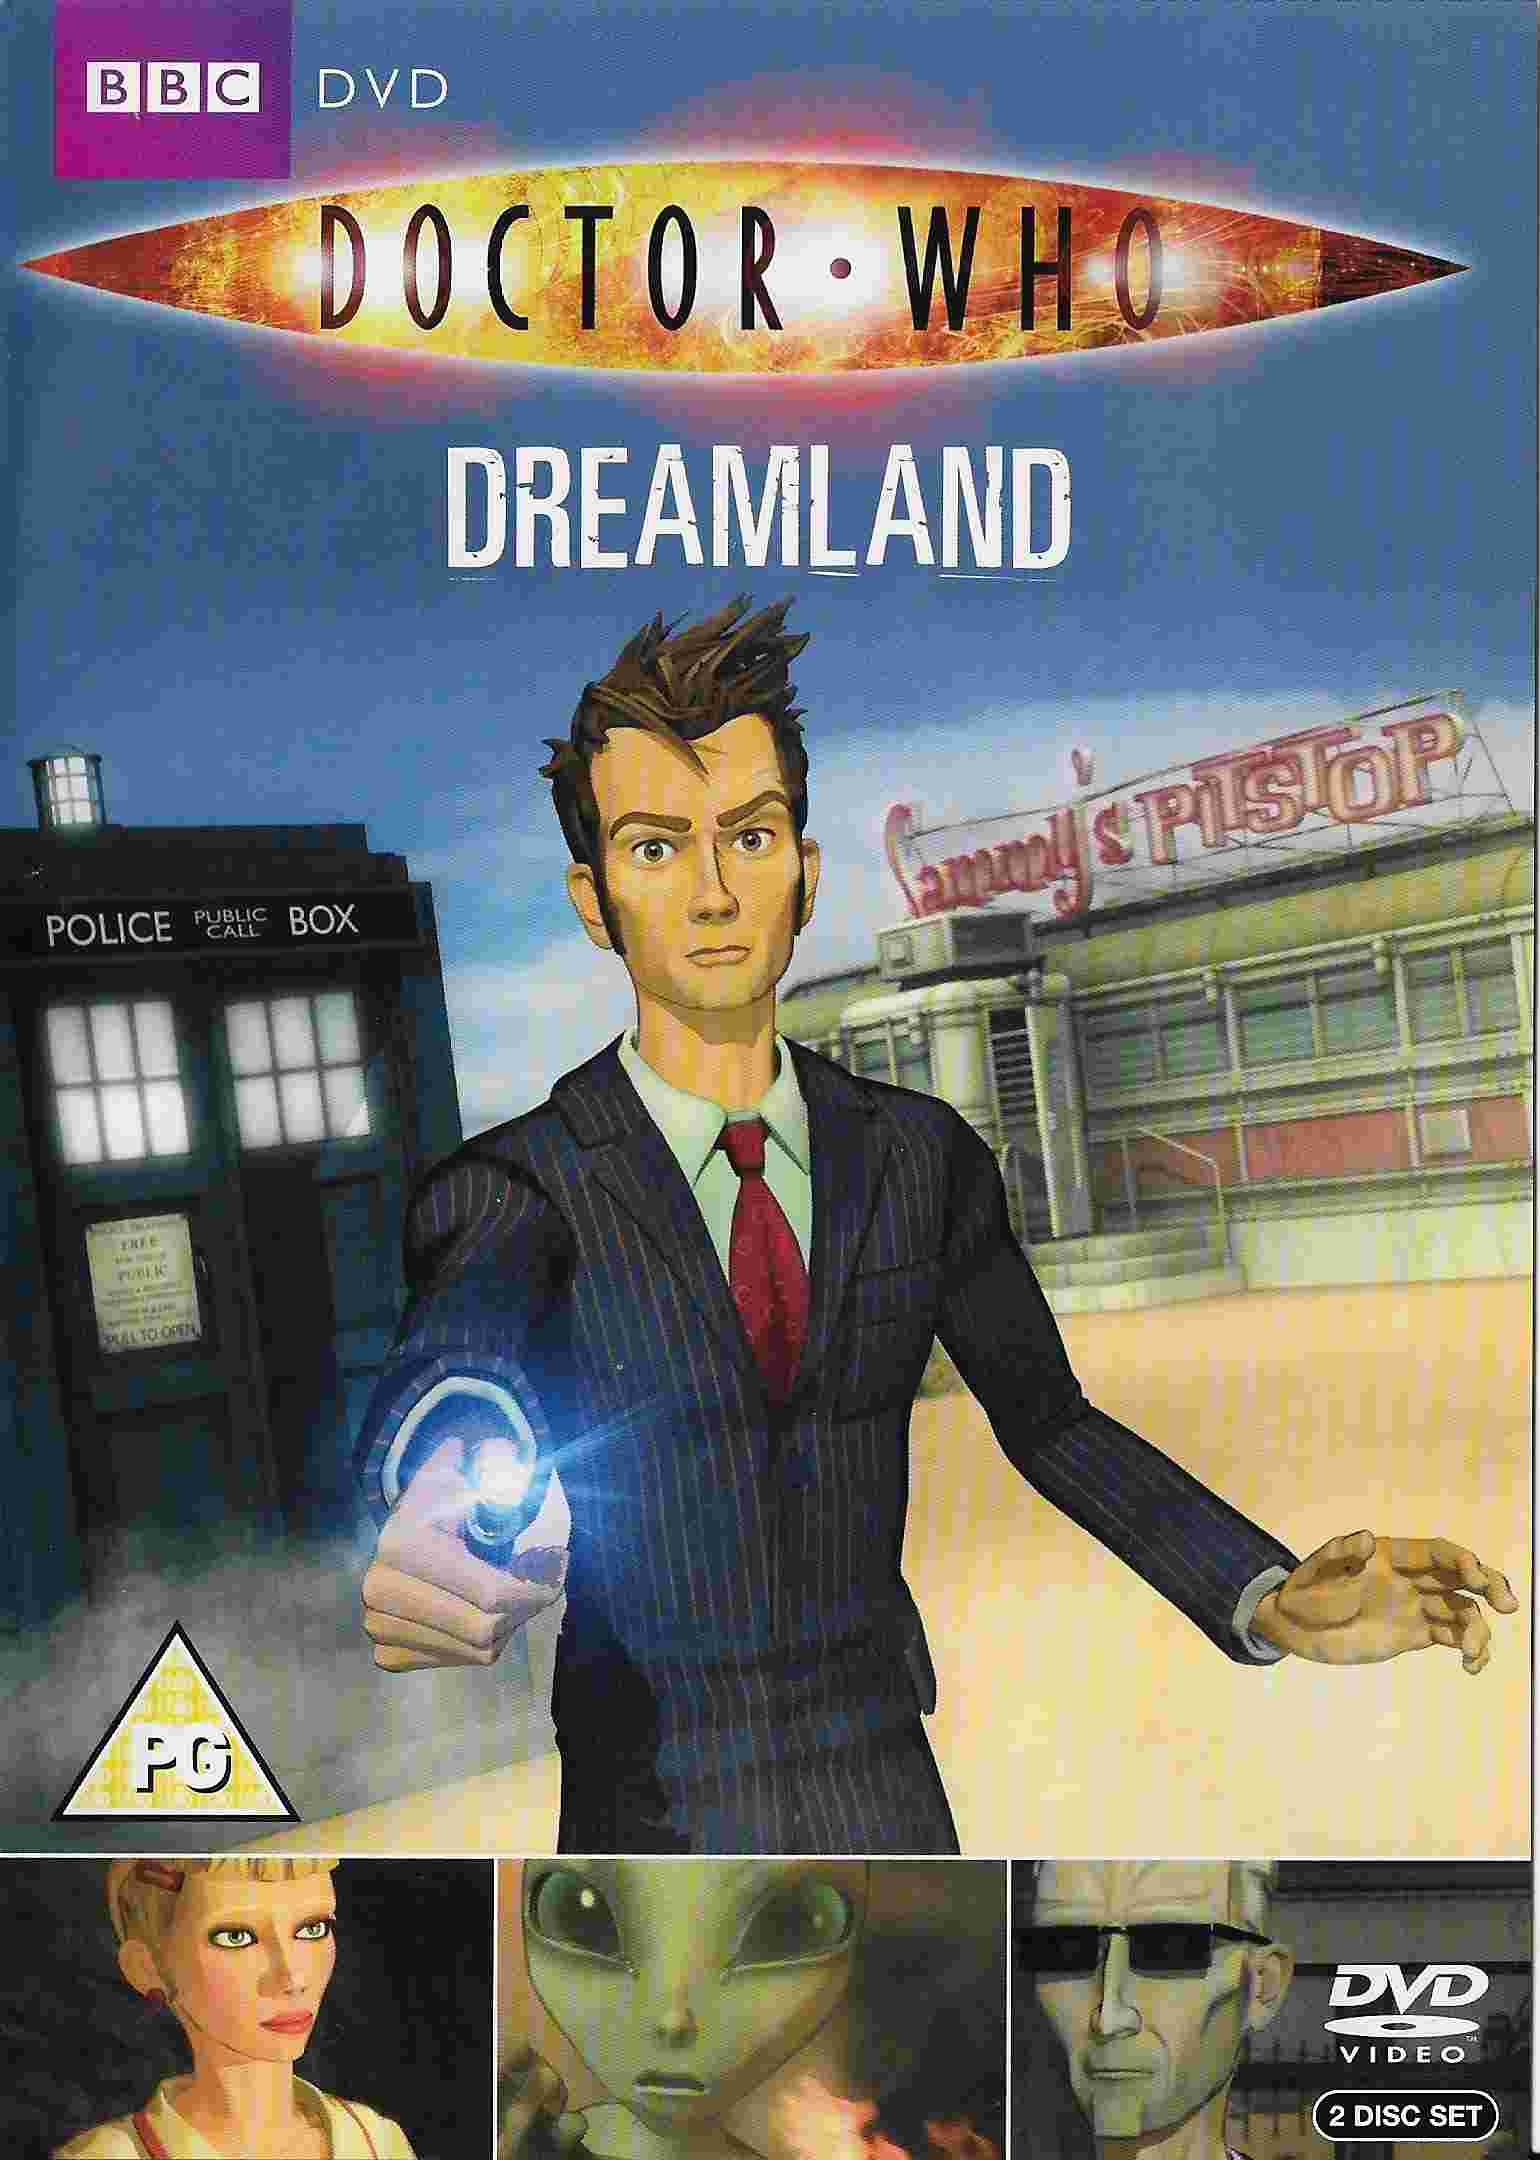 Picture of BBCDVD 3163 Doctor Who - Dreamland (Animation) by artist Phil Ford from the BBC dvds - Records and Tapes library